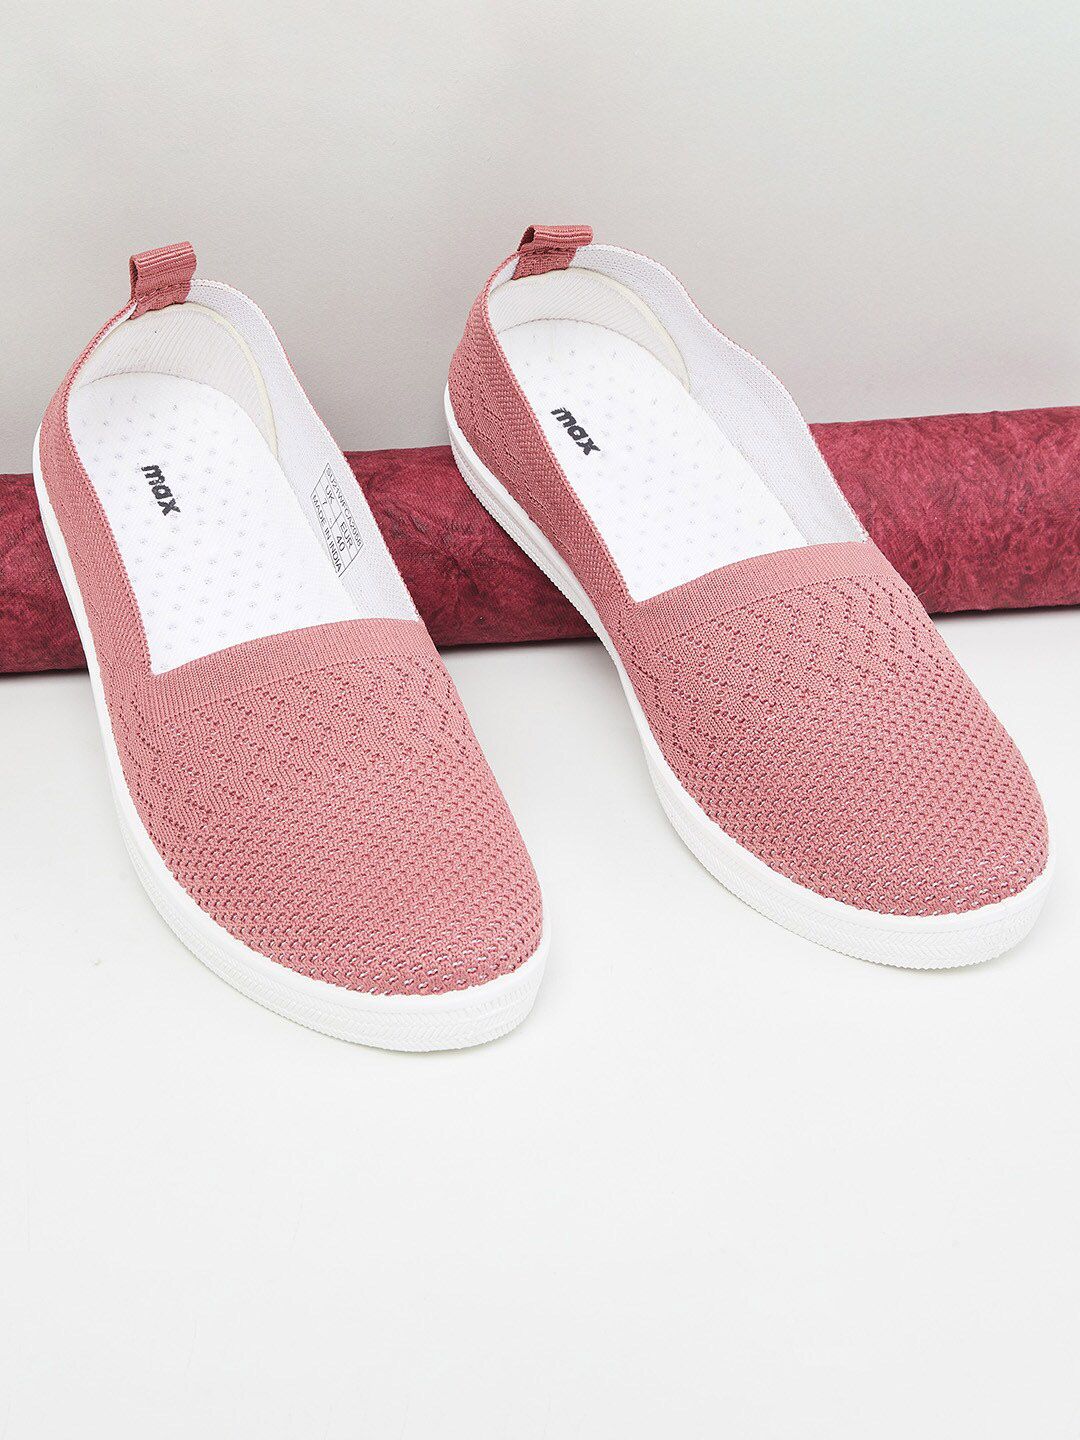 max Women Pink Woven Design Slip-On Sneakers Price in India